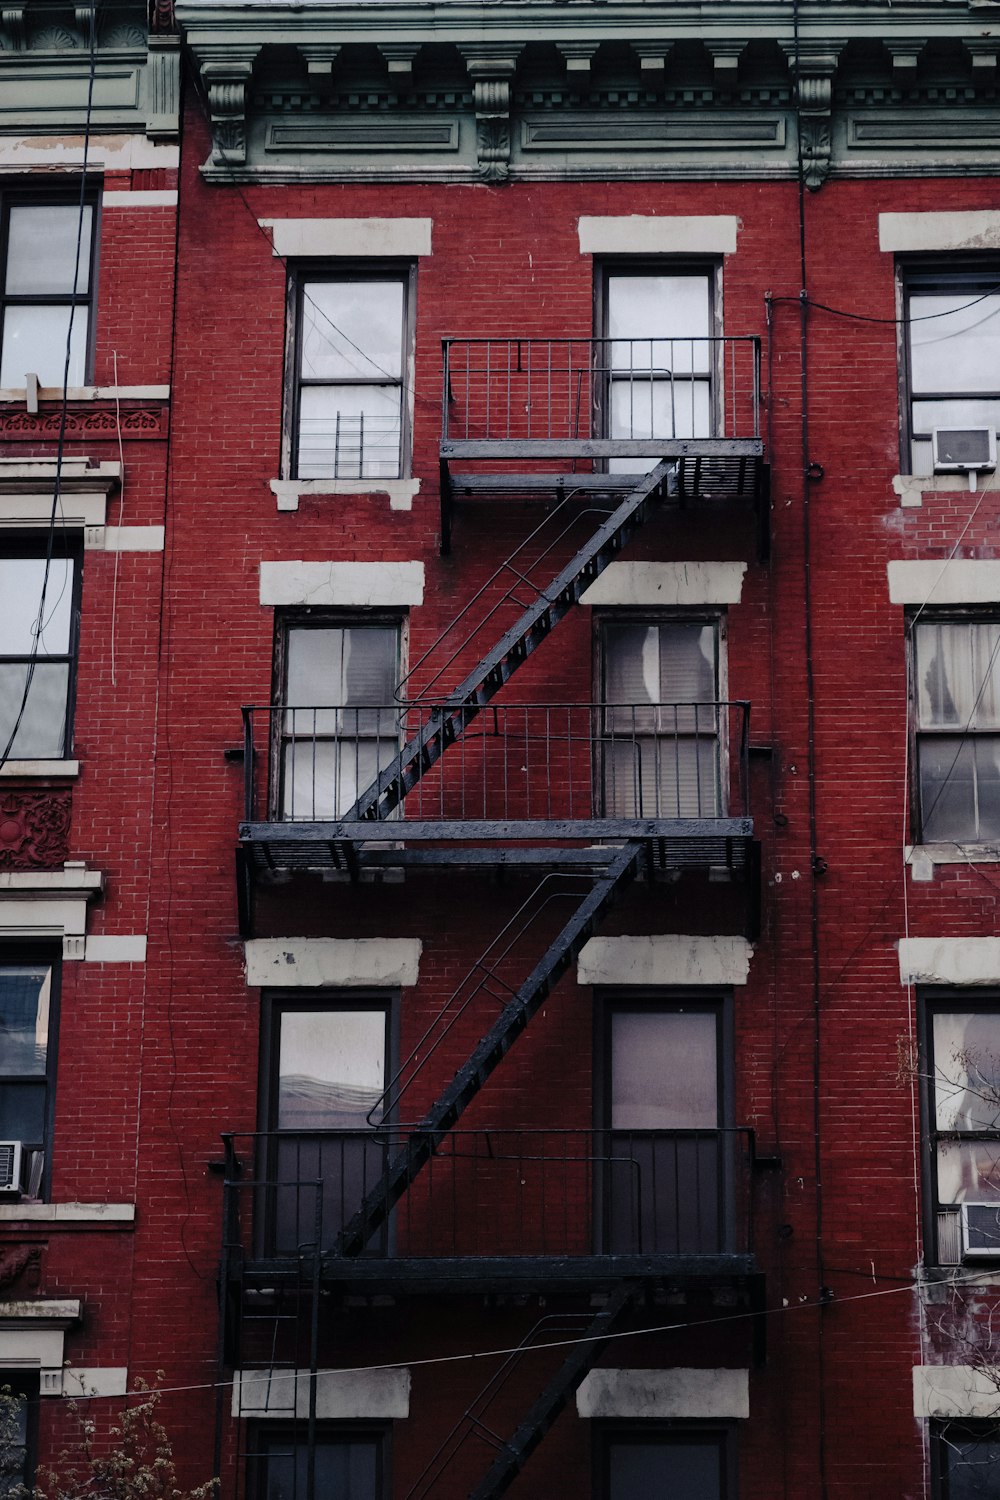 a fire escape on the side of a red brick building